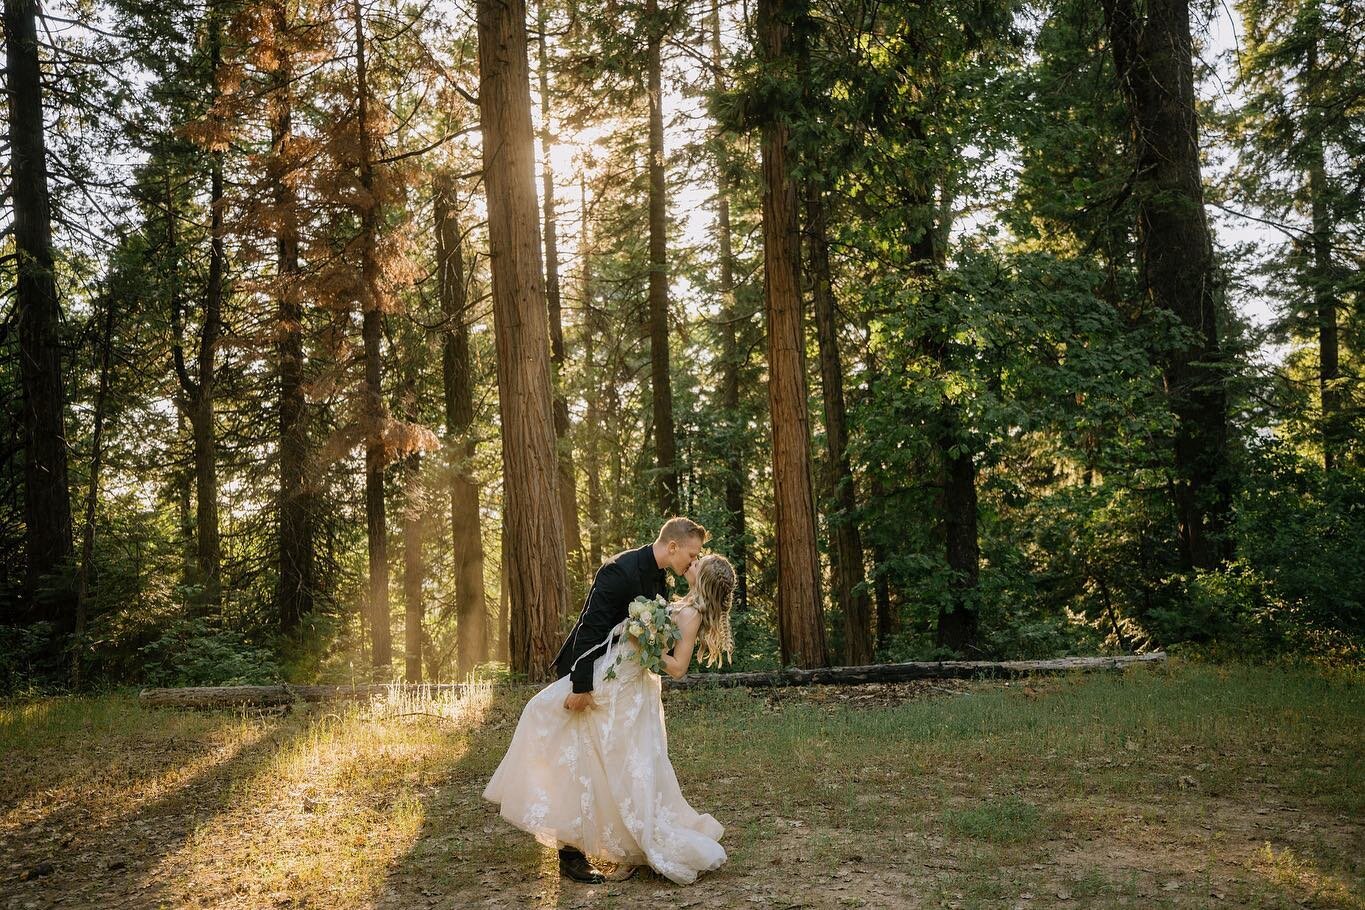 From high school sweethearts to this enchanting forest wedding, Jaden and Kara&rsquo;s love story is truly inspiring. Here&rsquo;s to forever and beyond! 

#ForestFairyTale #LoveInBloom #LoveKnowsNoDistance #EternalLove  #ForestWedding #LoveConquersA